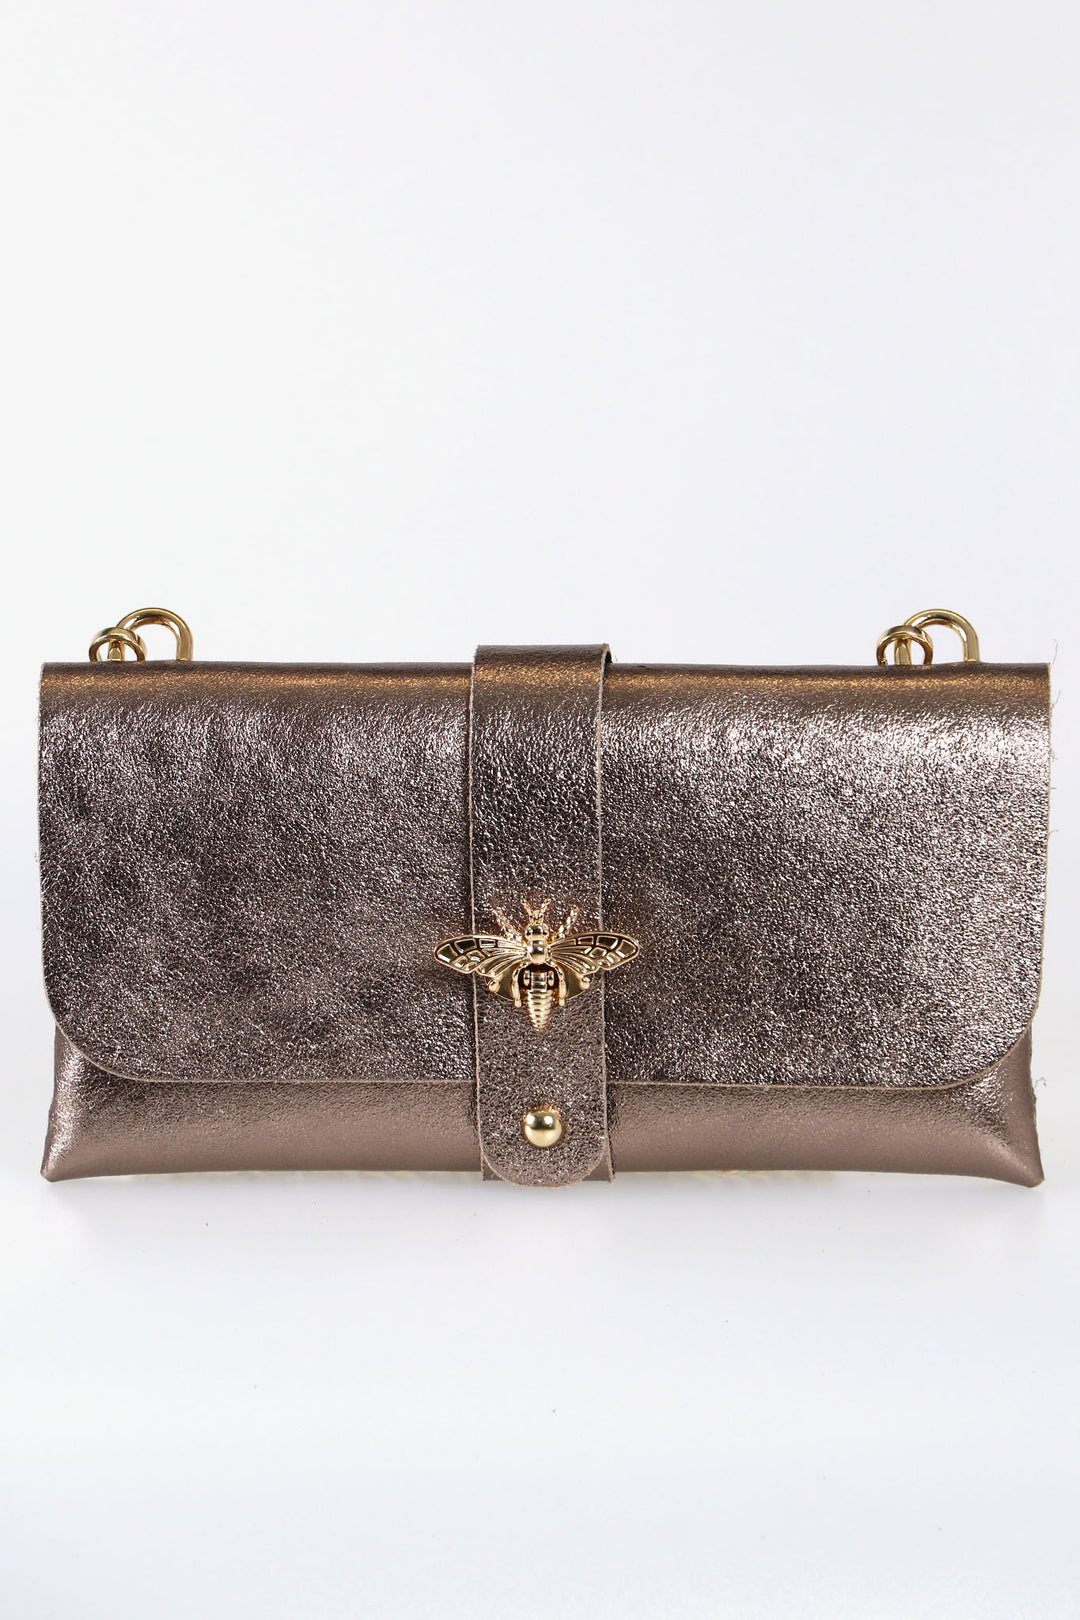 Champagne Bee Emblem Genuine Italian Leather Clutch Bag with Gold Chain Strap